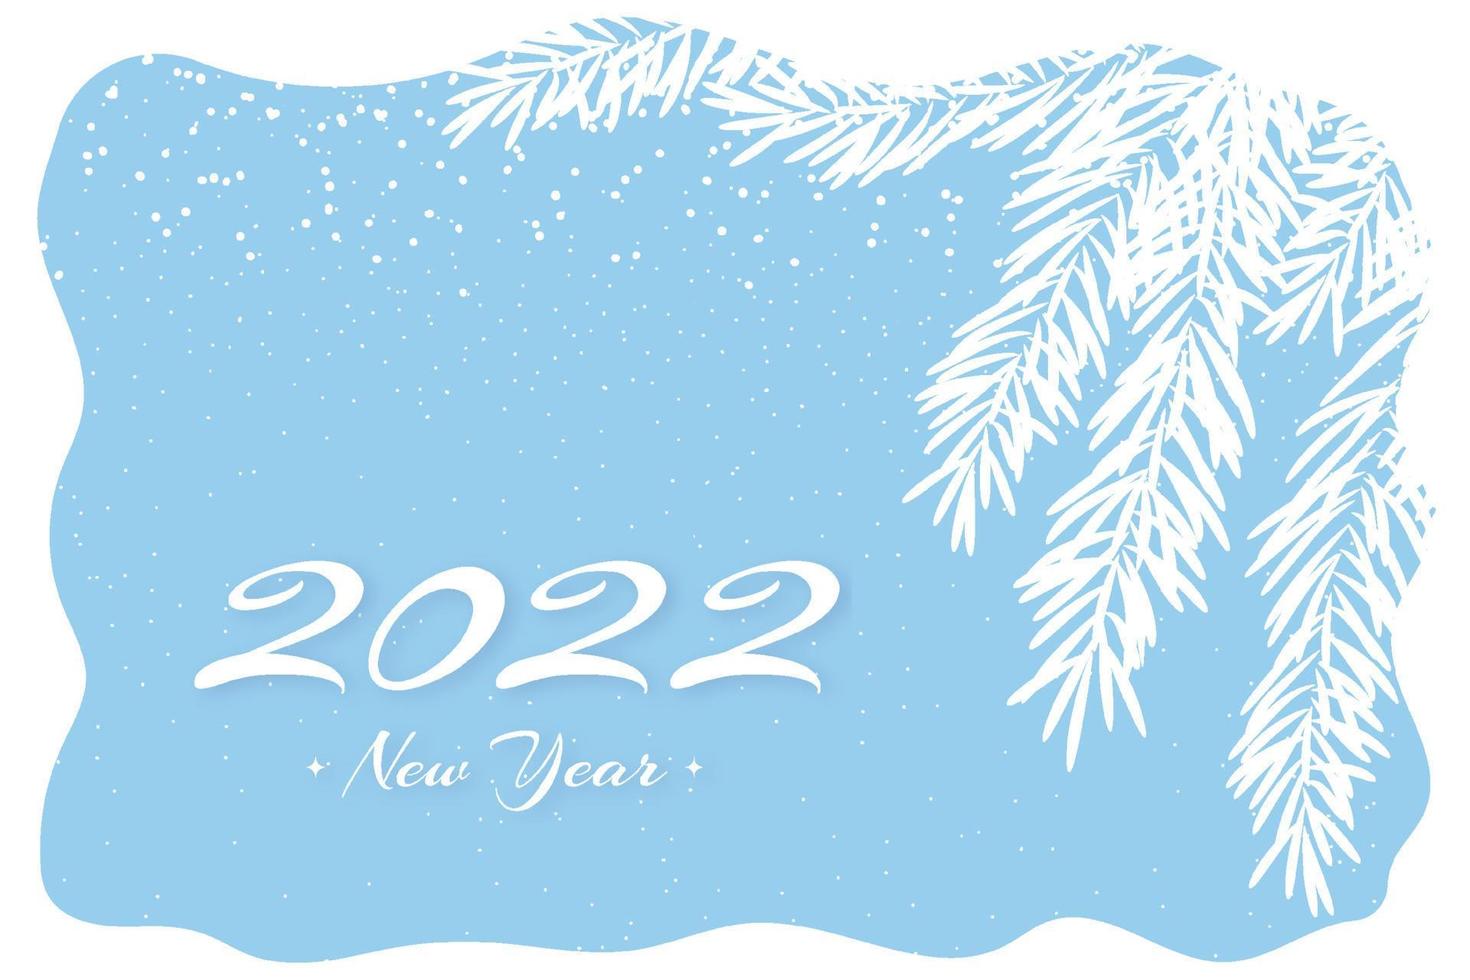 2022 snow card in flat style on light background. New year illustration. Blue color vector background. Abstract landscape banner design. Holiday celebration concept